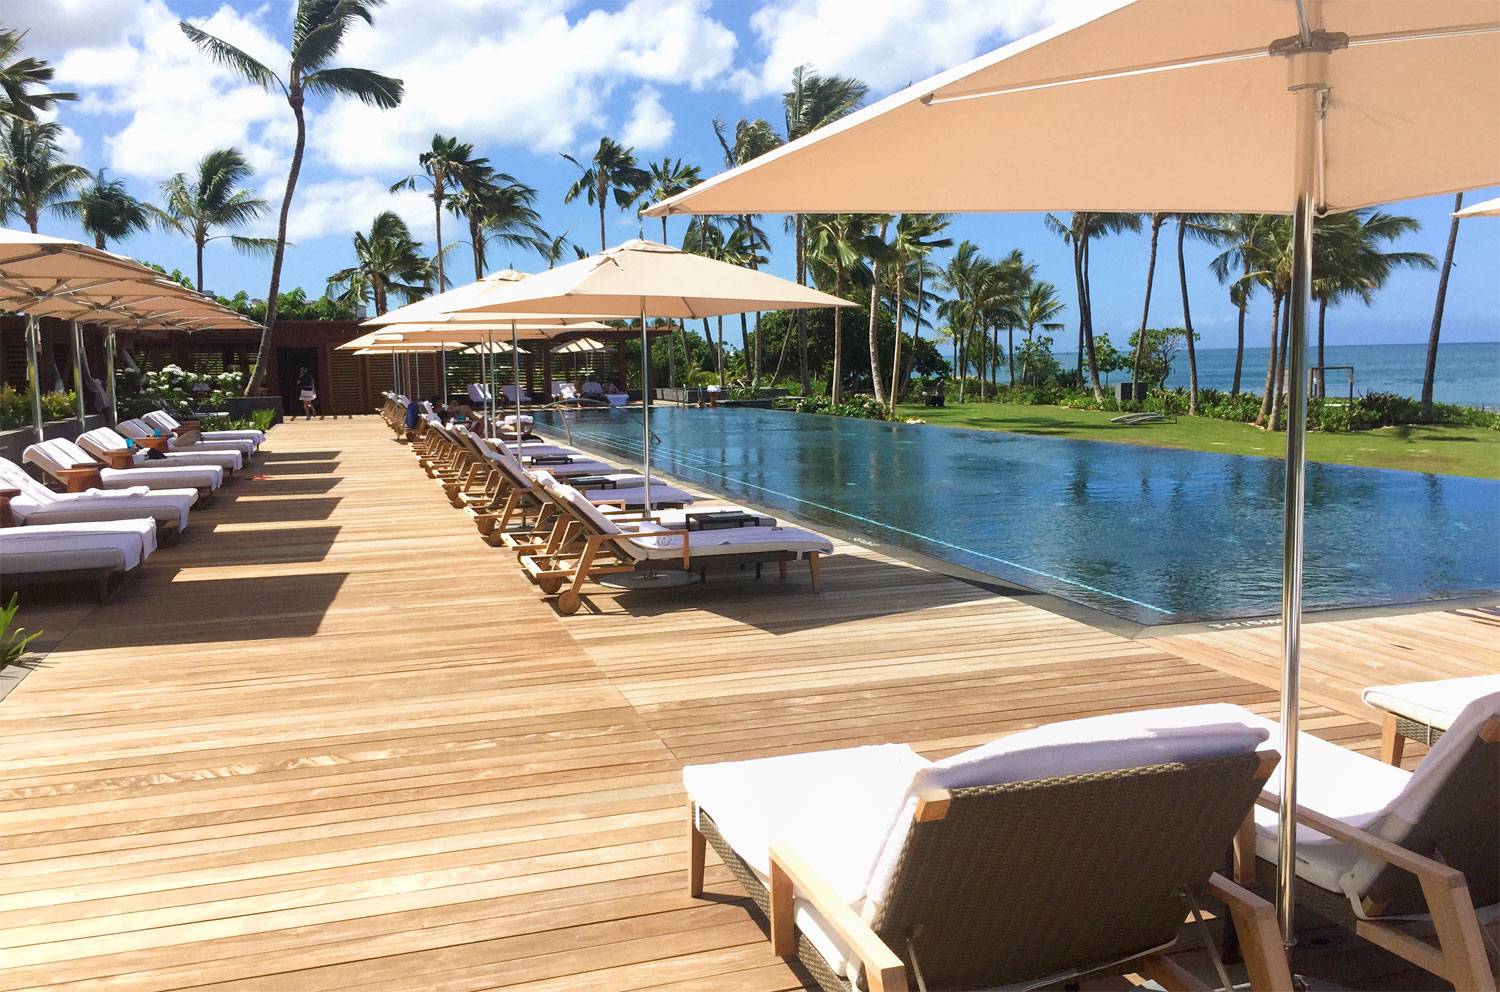 Four Seasons Resort Pool Deck with Buzon Pedestals and Ipe Wood Decking